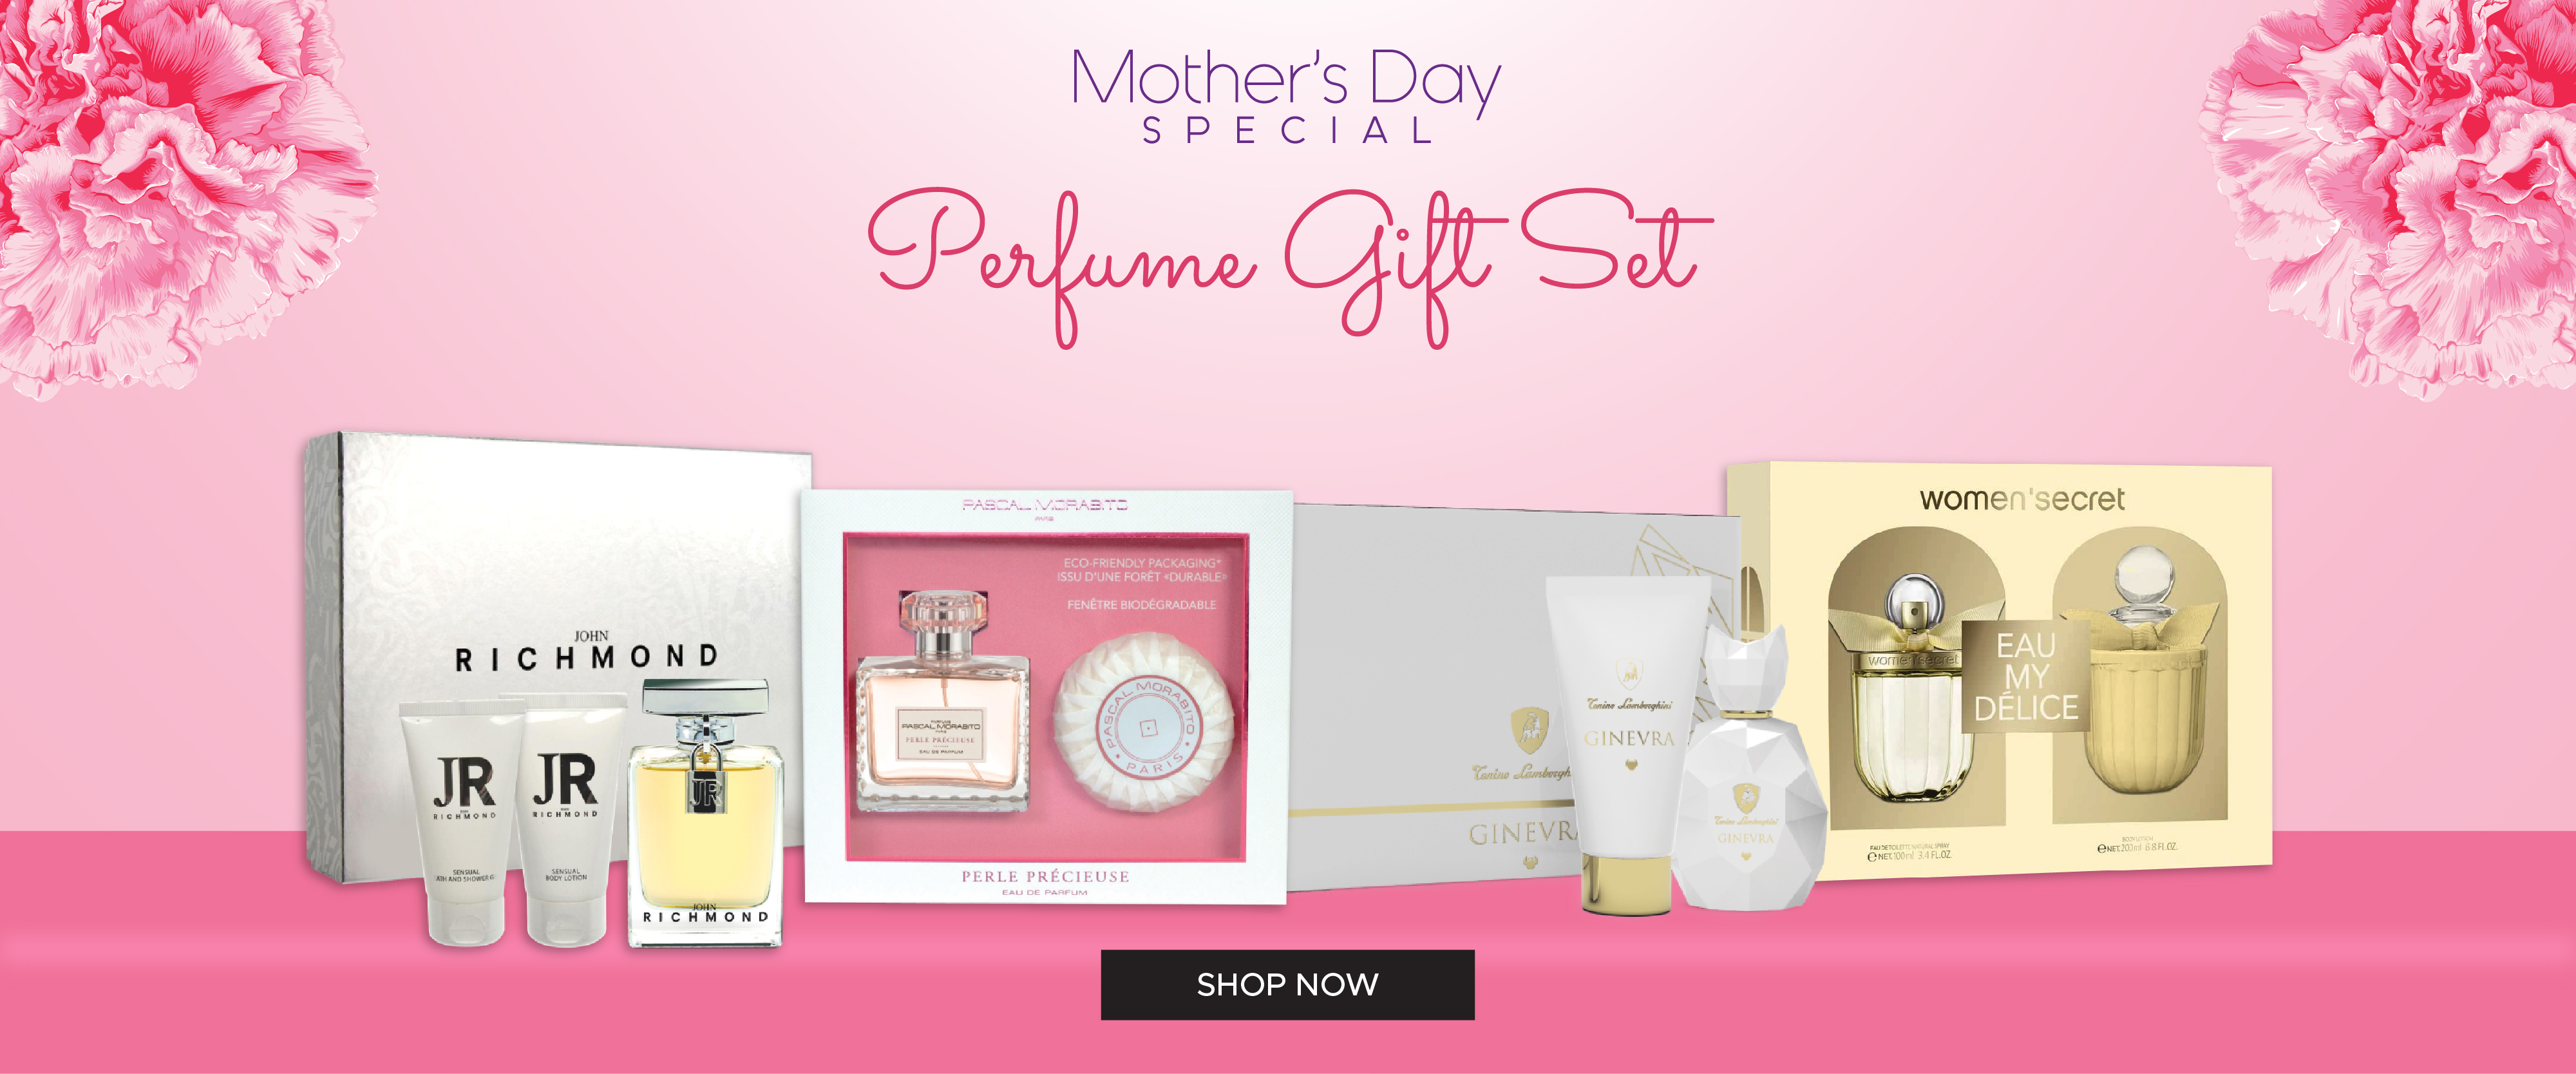 Mother's Day Perfume Gift Set